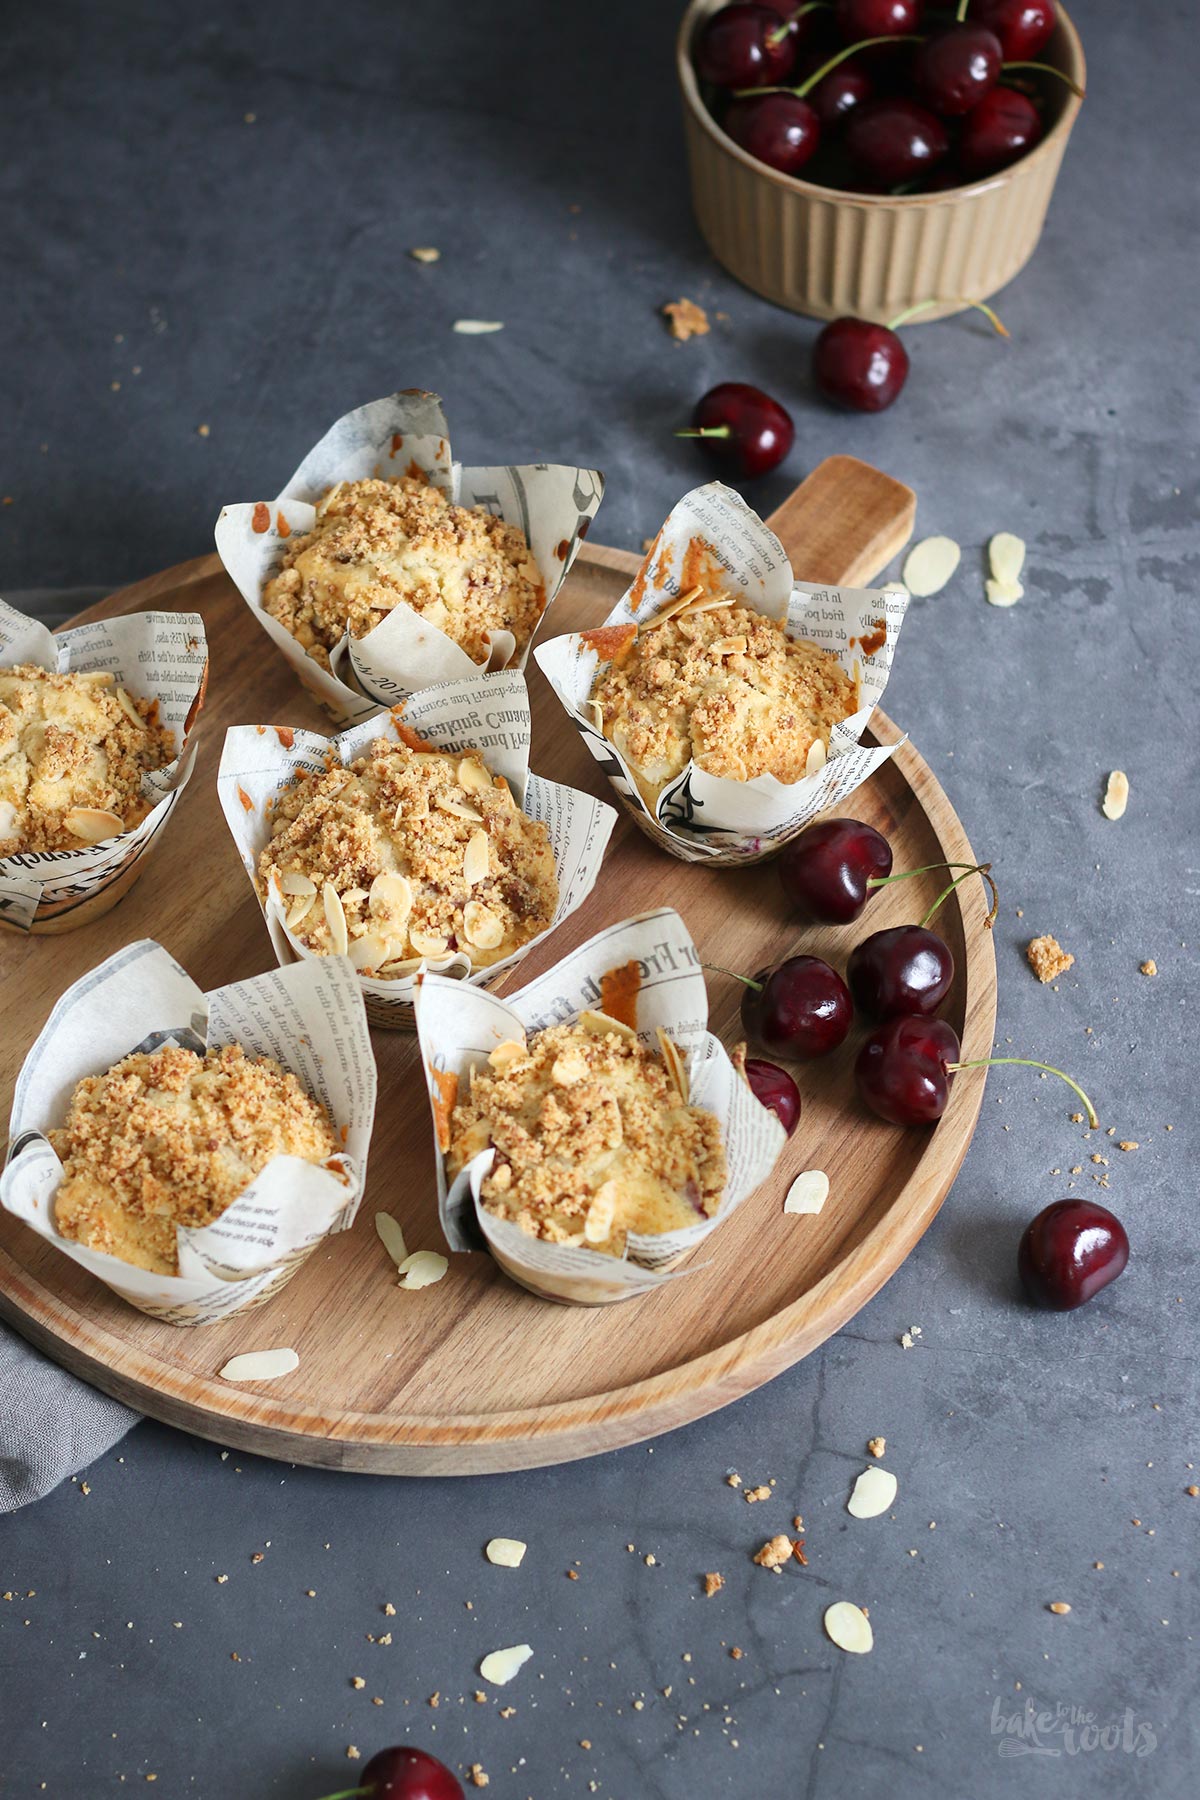 Cherry Streusel Muffins | Bake to the roots